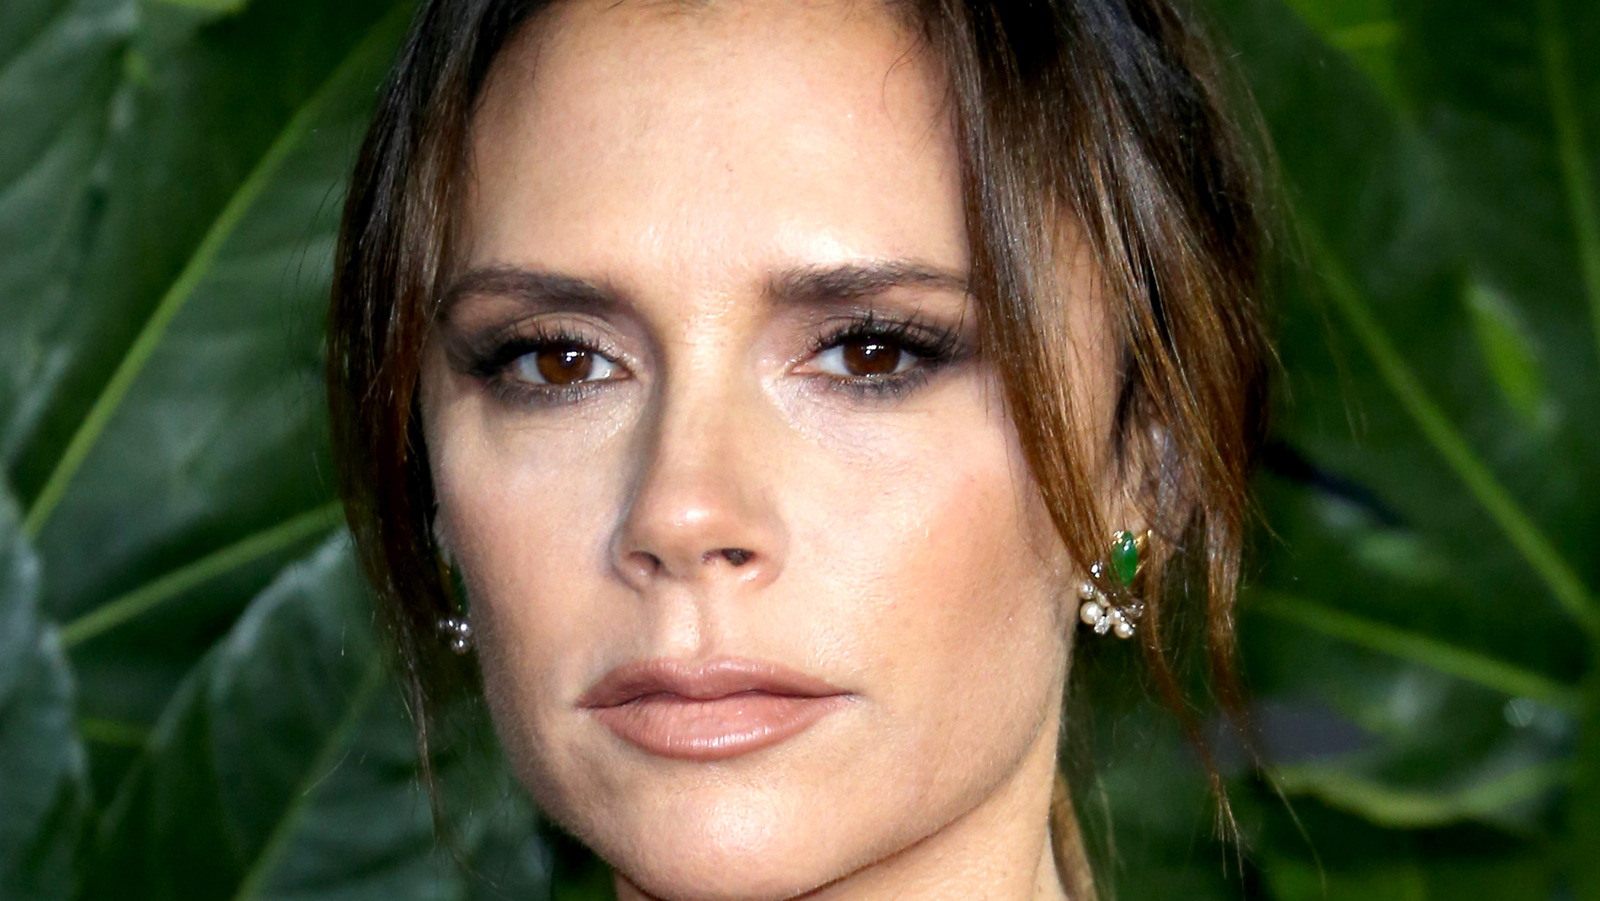 Victoria Beckham's Birkin bag collection and her new favorite: Pics